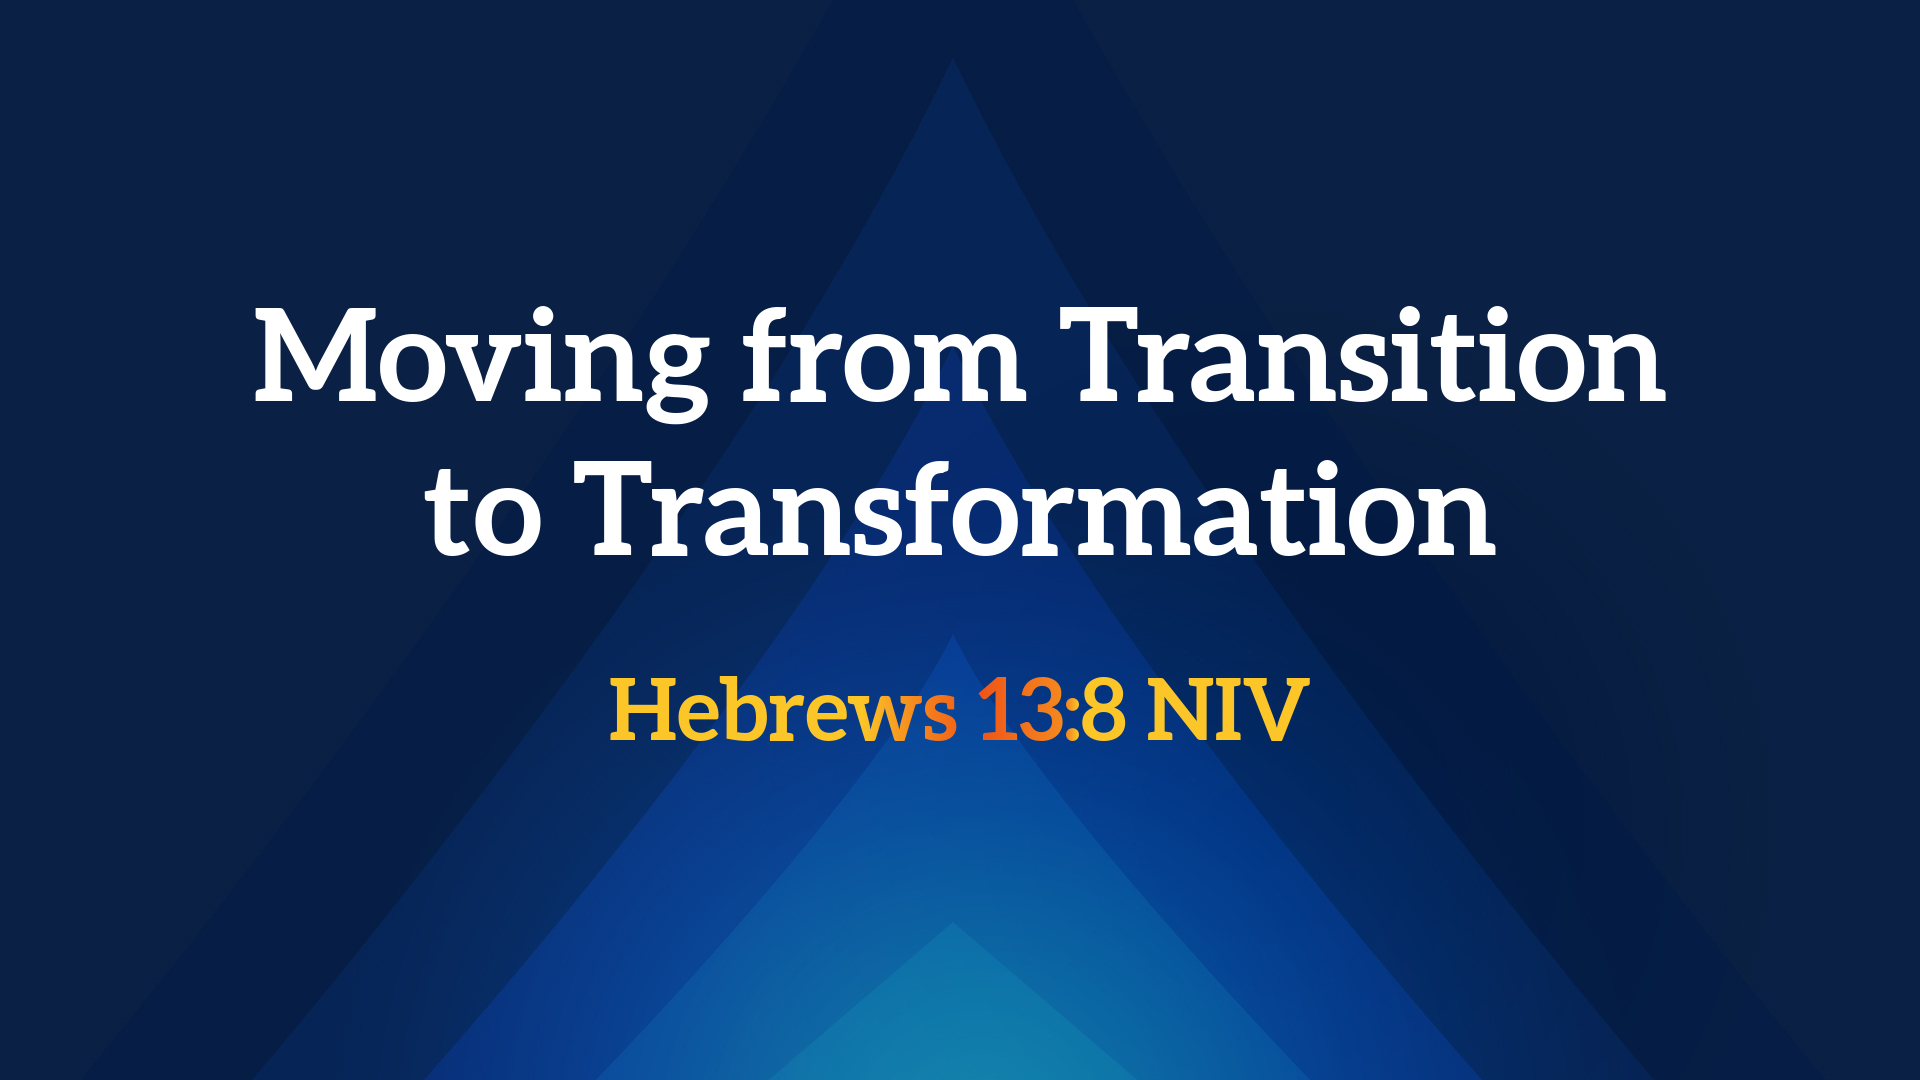 Moving from Transition to Transformation